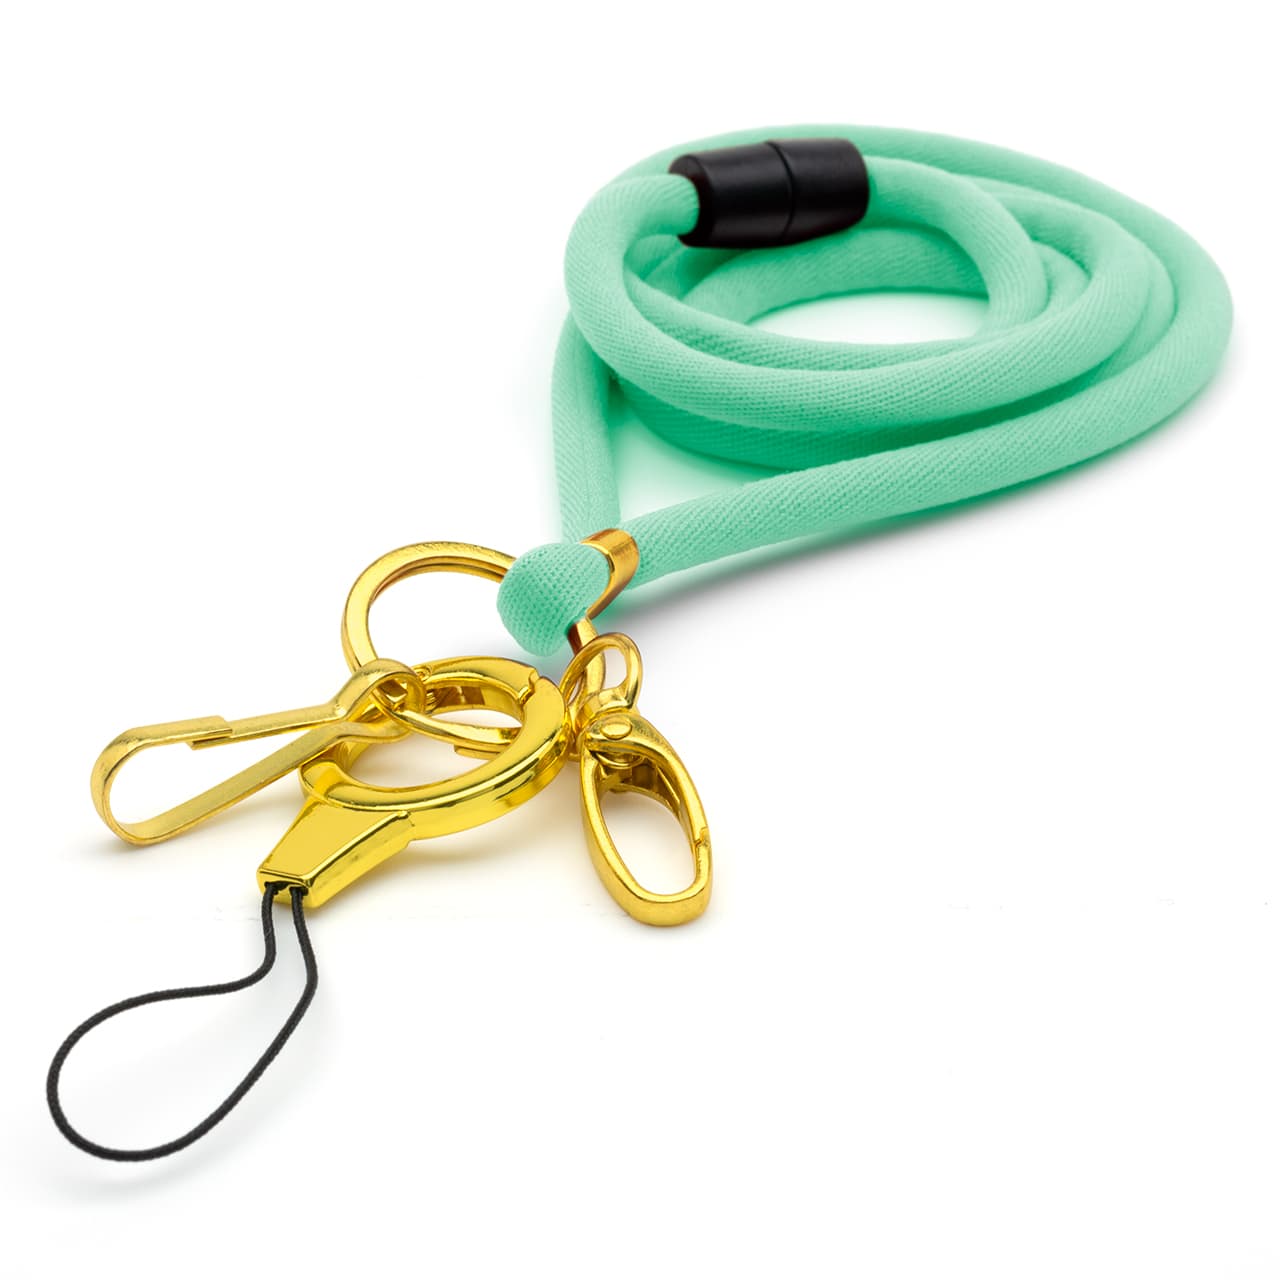 Nylon Rope Lanyard Cord | Breakaway Neck Strap (with 3 Clips) - mint